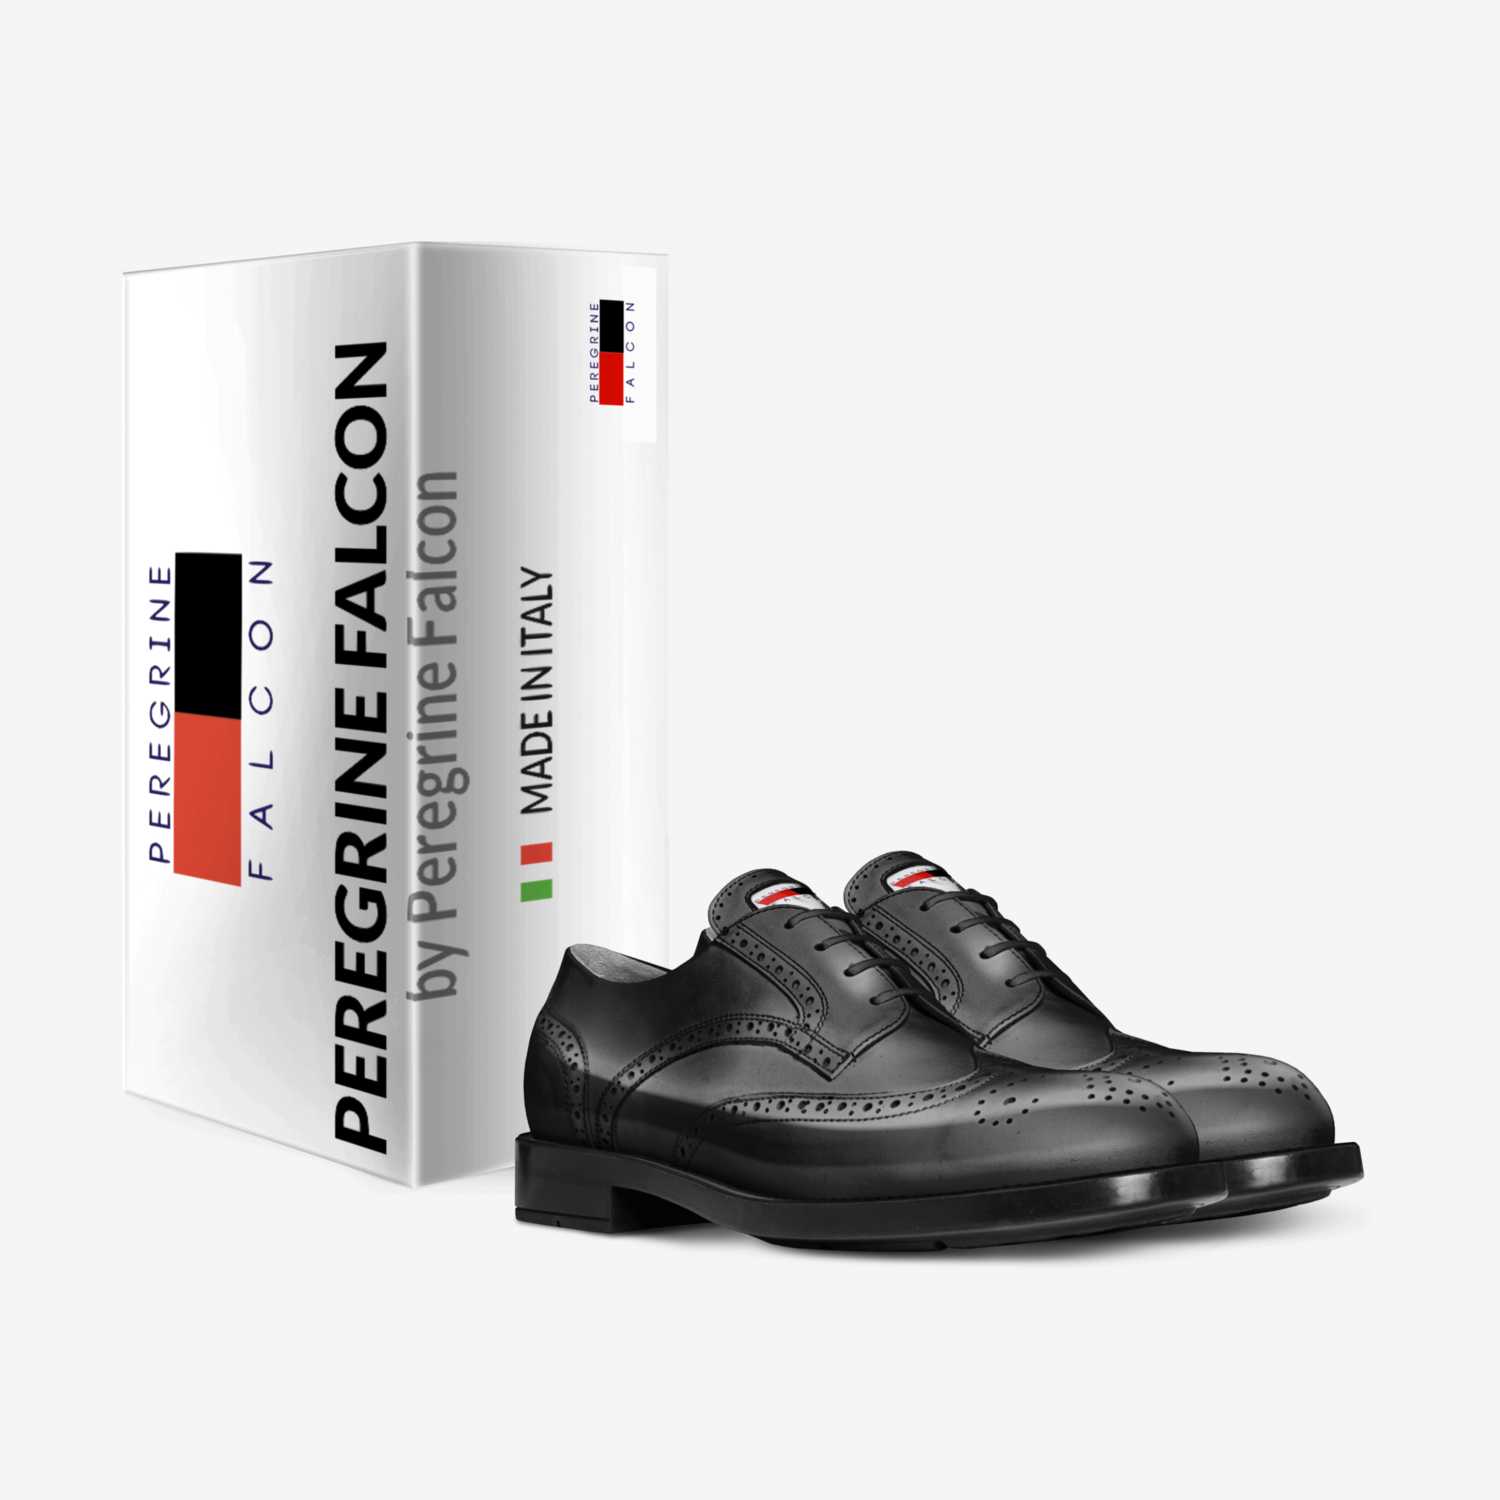 PEREGRINE FALCON custom made in Italy shoes by Peregrine Falcon | Box view